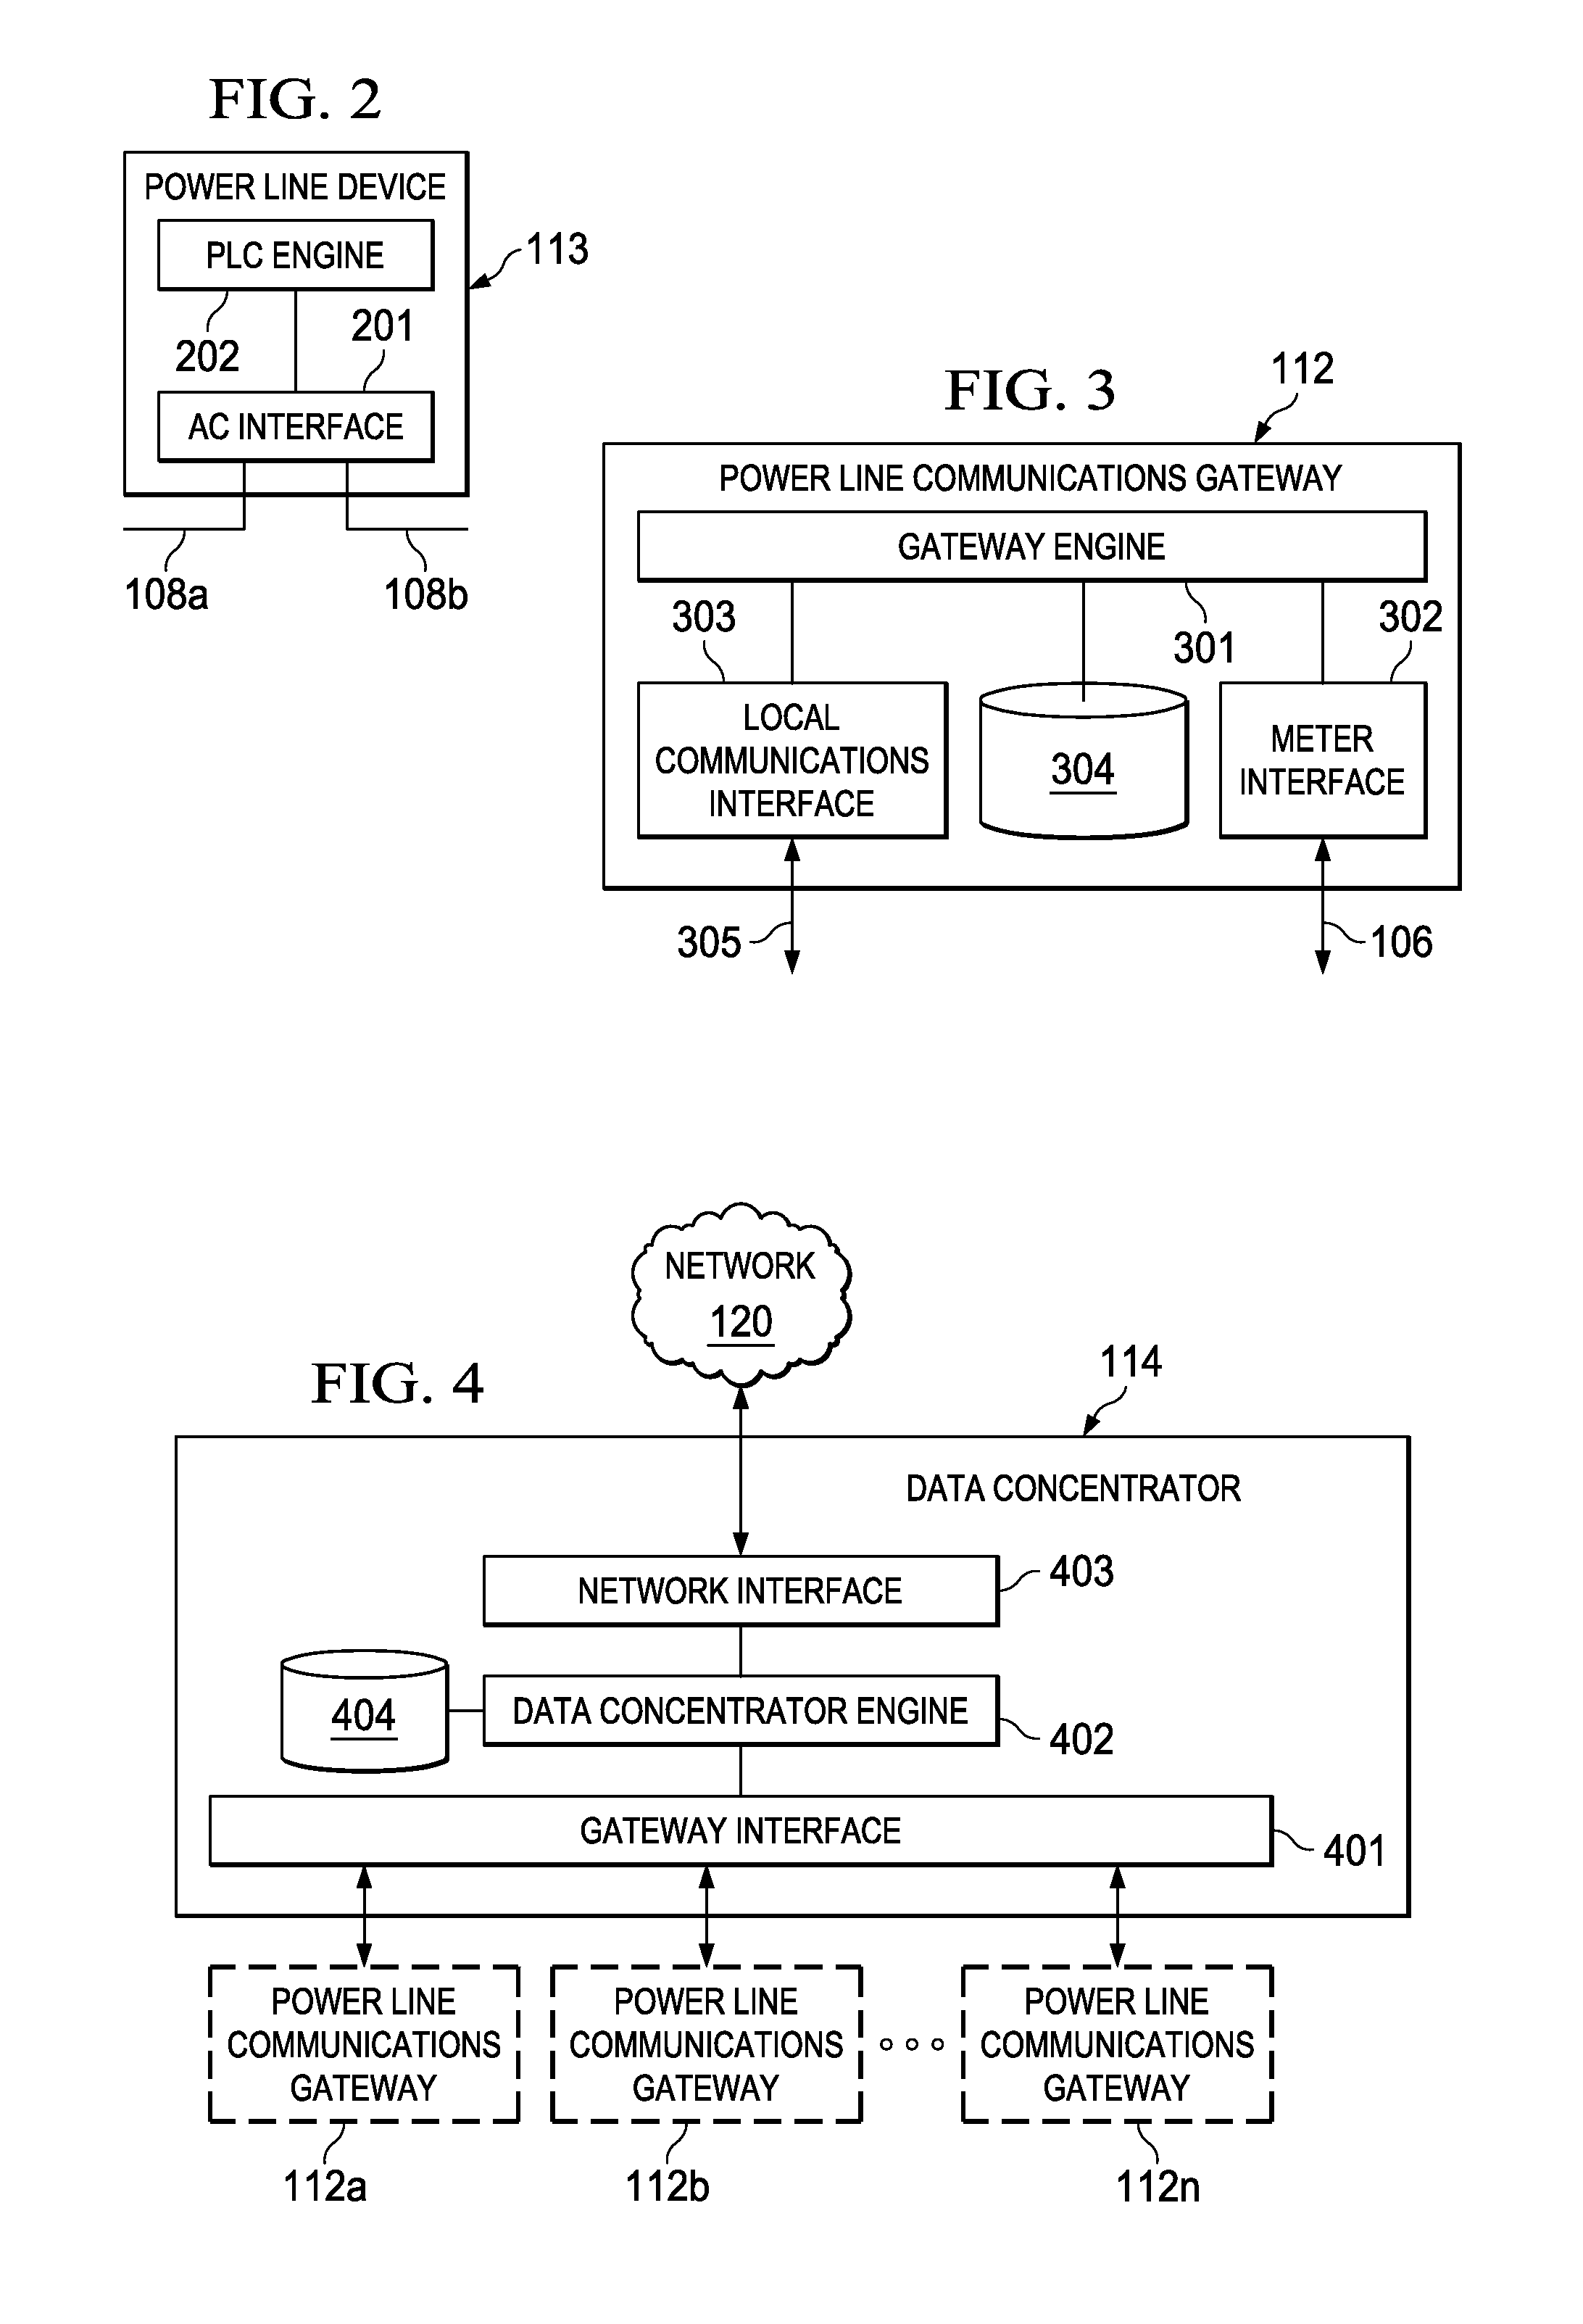 Overlapping priority contention windows for G3 power line communications networks